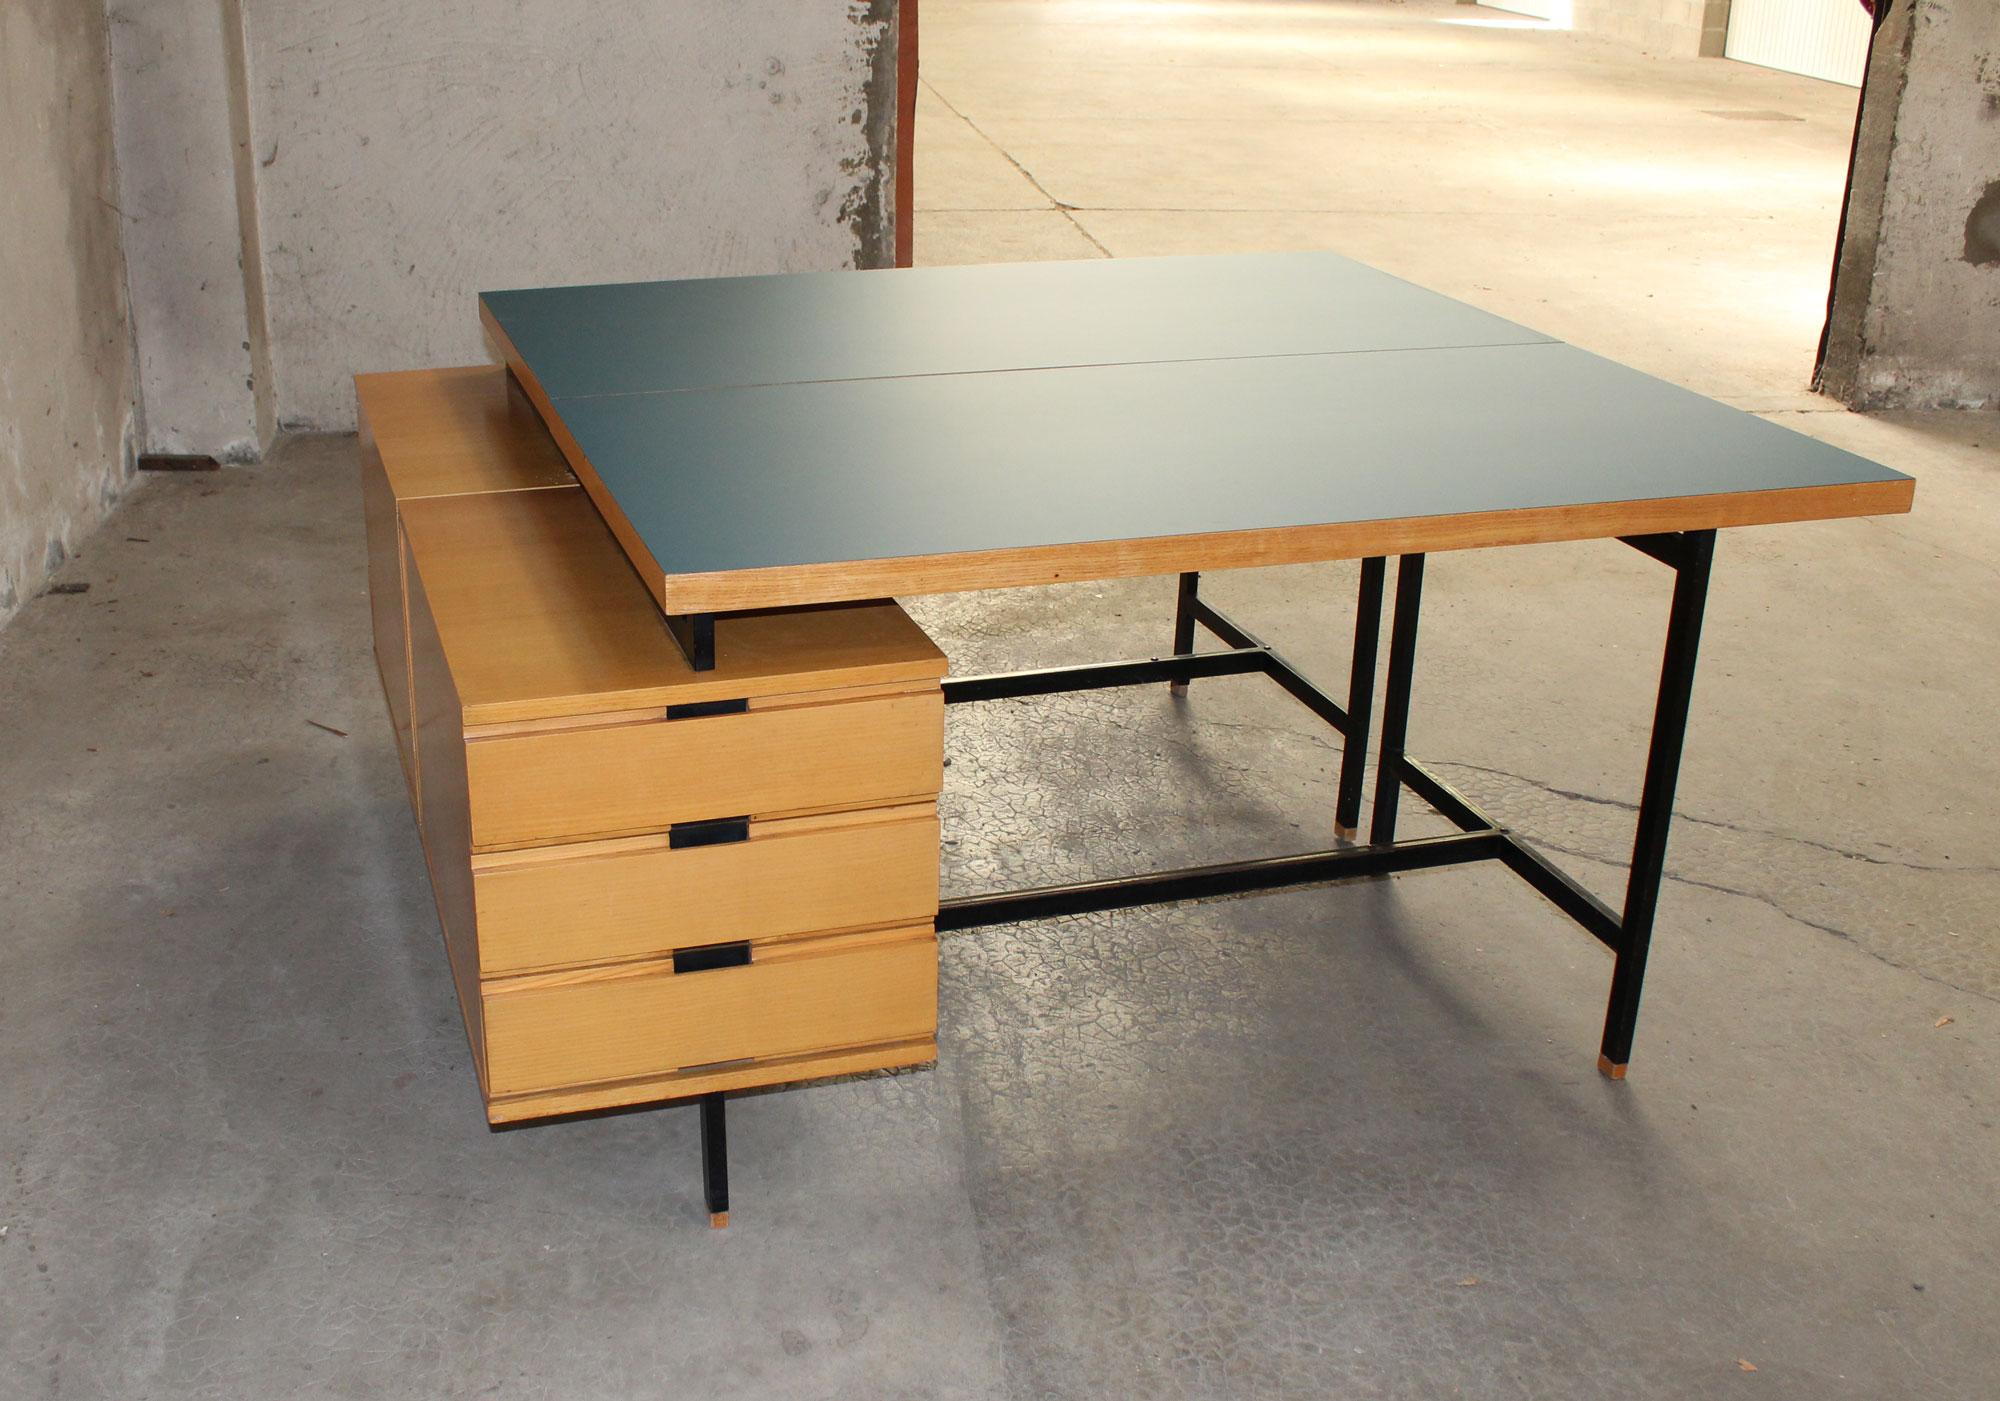 Rare pair of desk in ash and formica of Pierre Guariche for the Minvieille brand. Typical French work of the 50s.